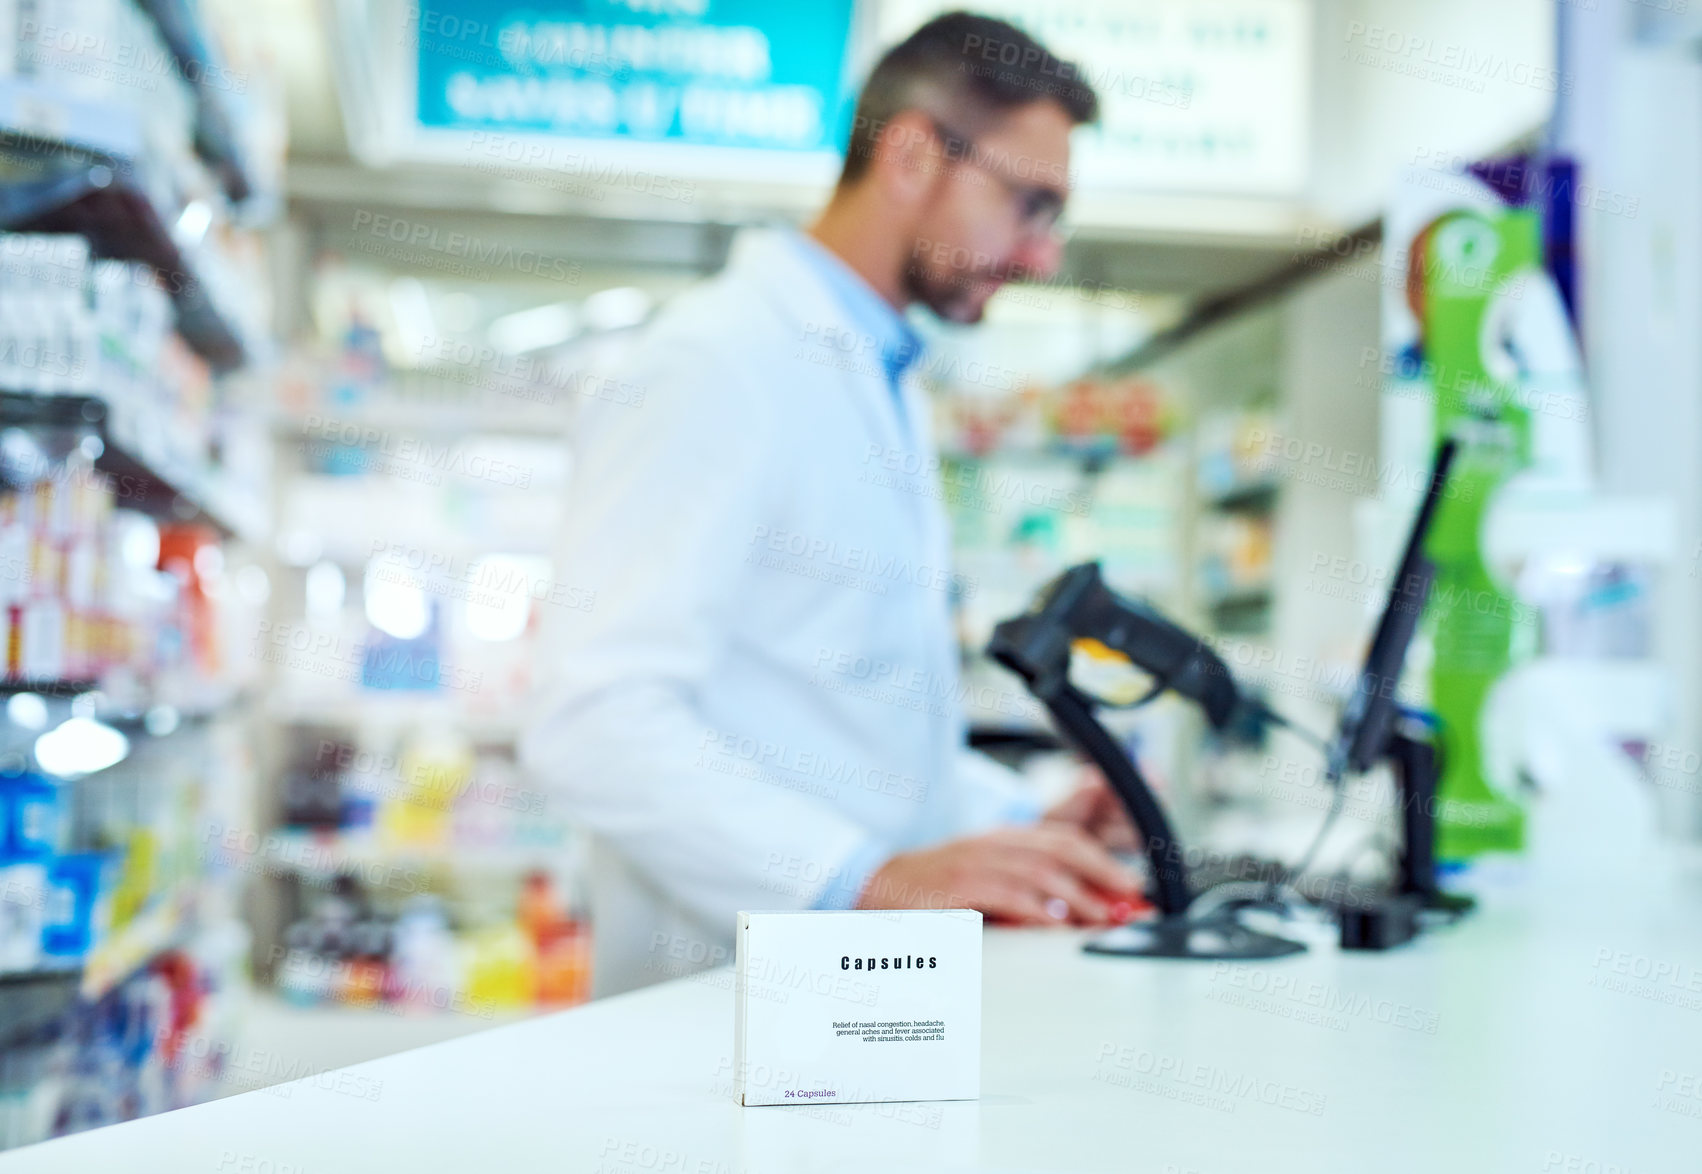 Buy stock photo Shot of a medicine package on the pharmacy counter while an unrecognizable male pharmacist works in the background